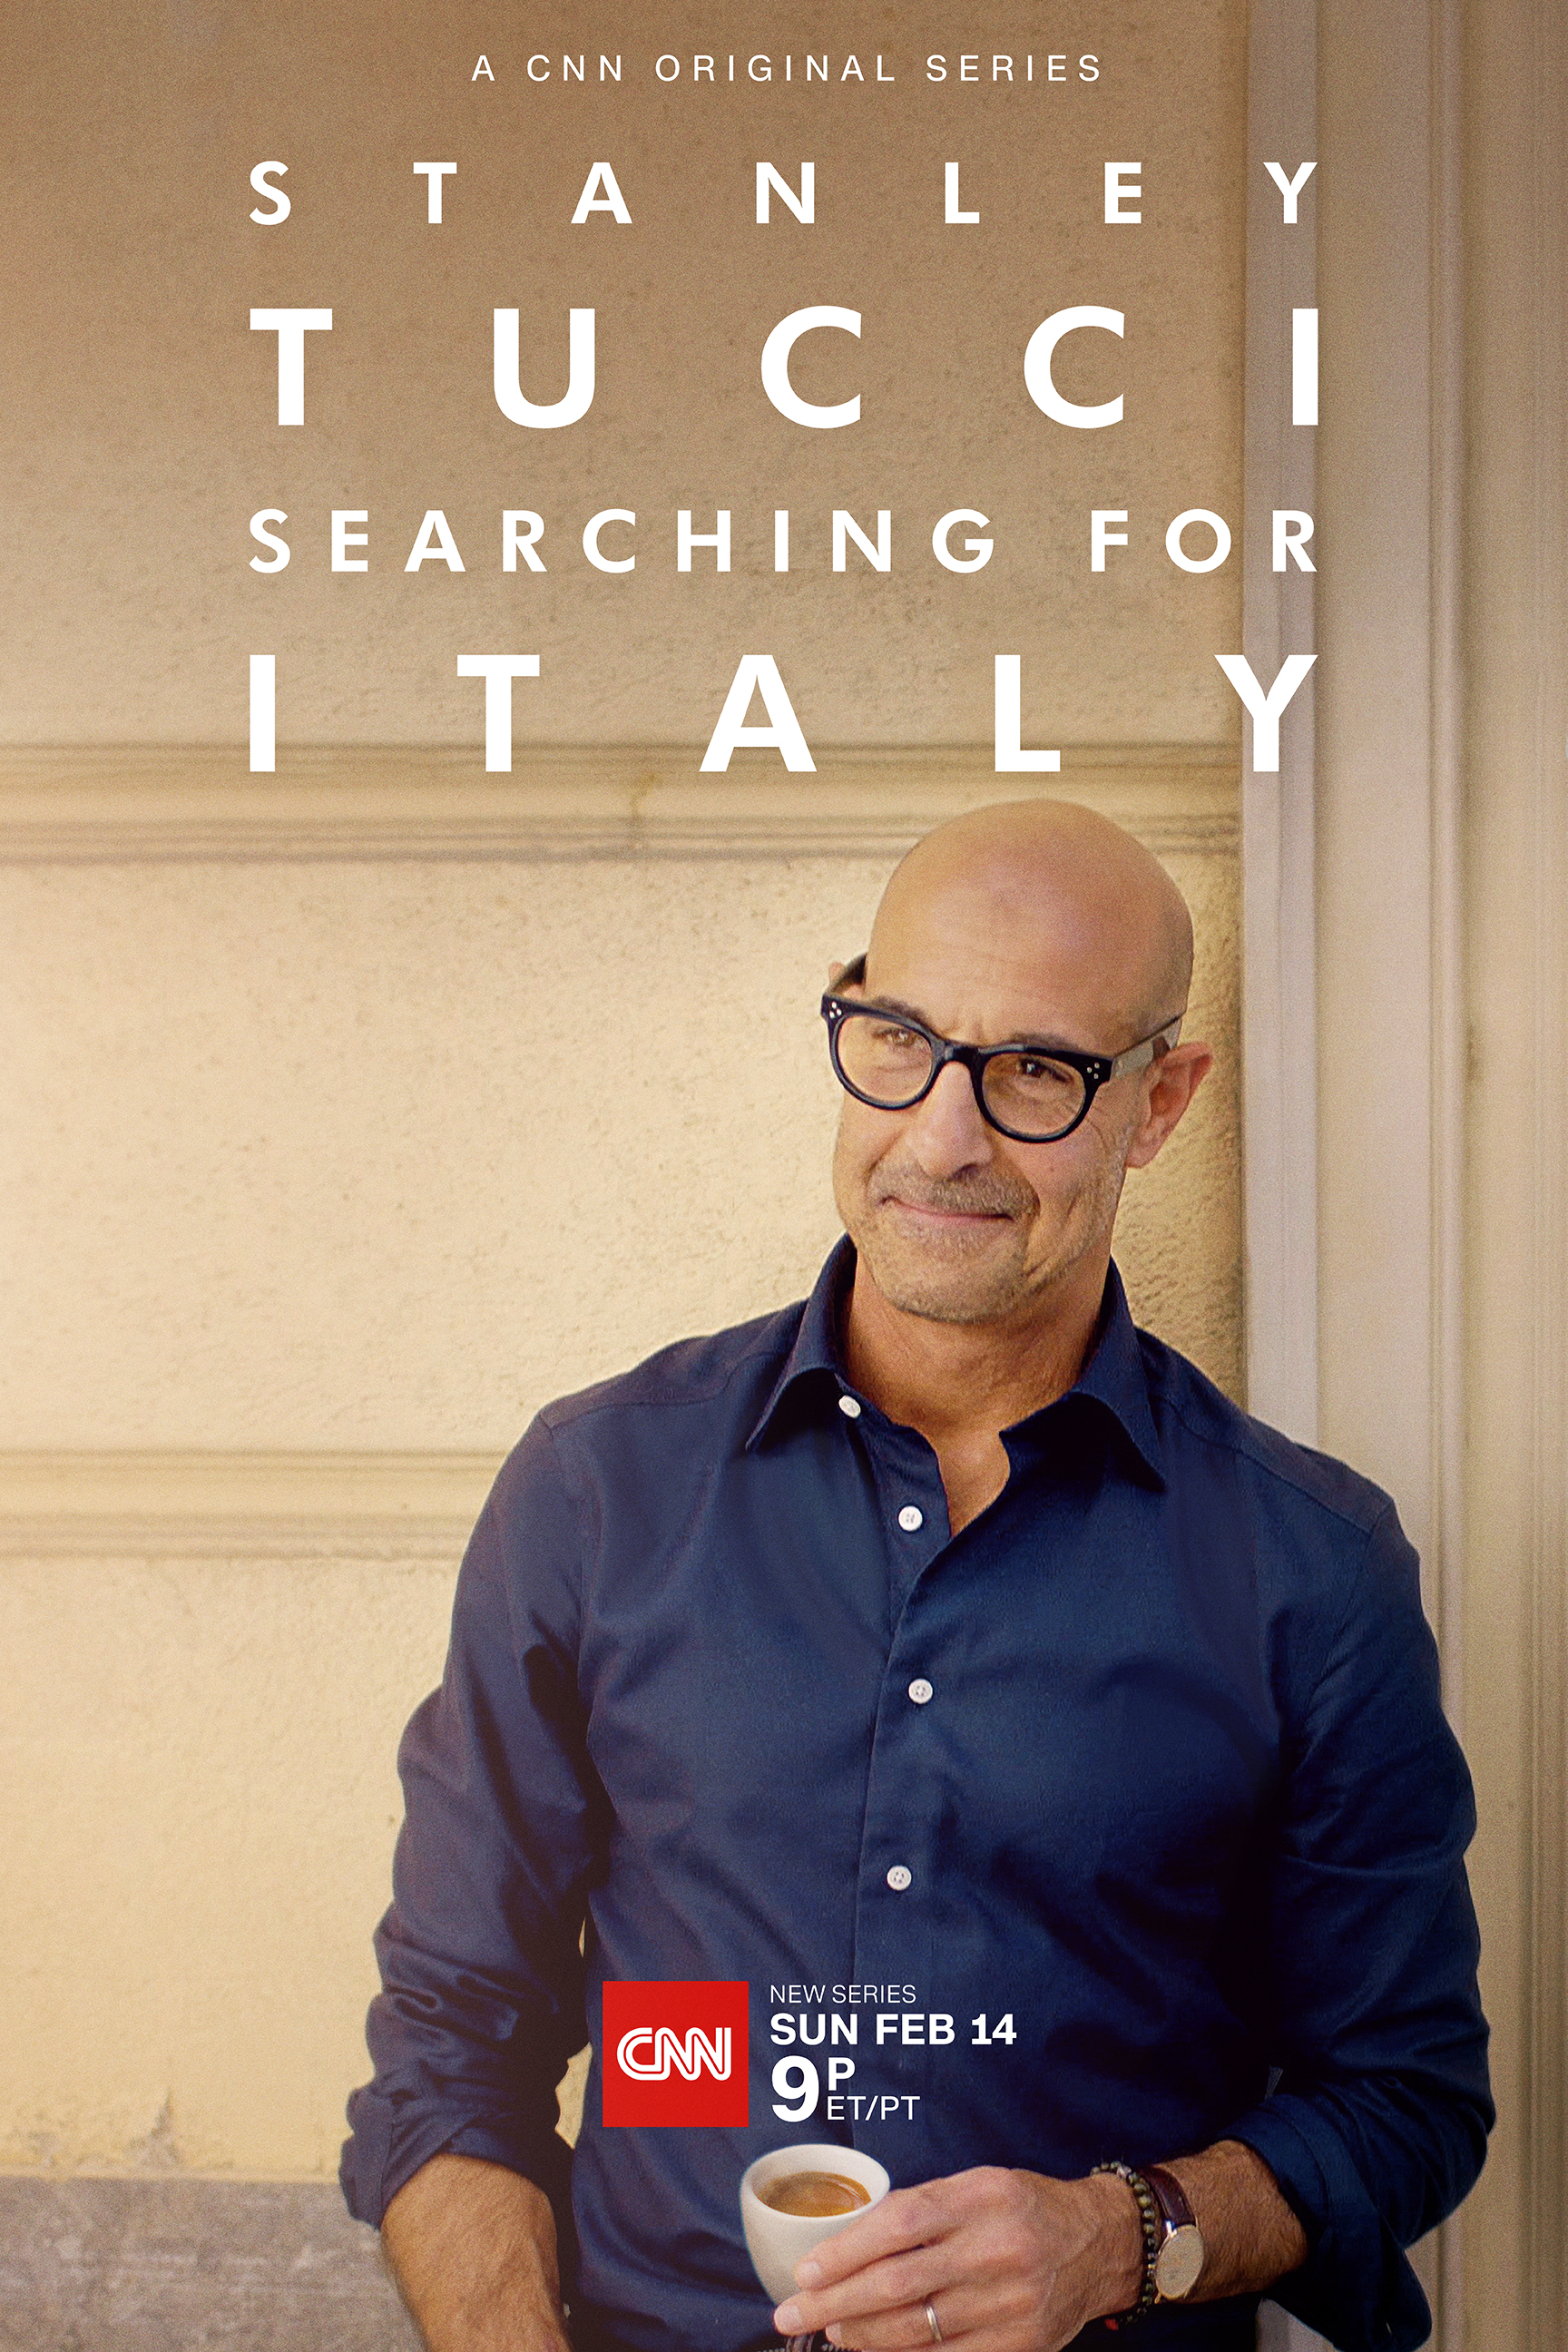 New Cnn Original Series Stanley Tucci Searching For Italy And Lincoln Divided We Stand Debut On Sunday February 14